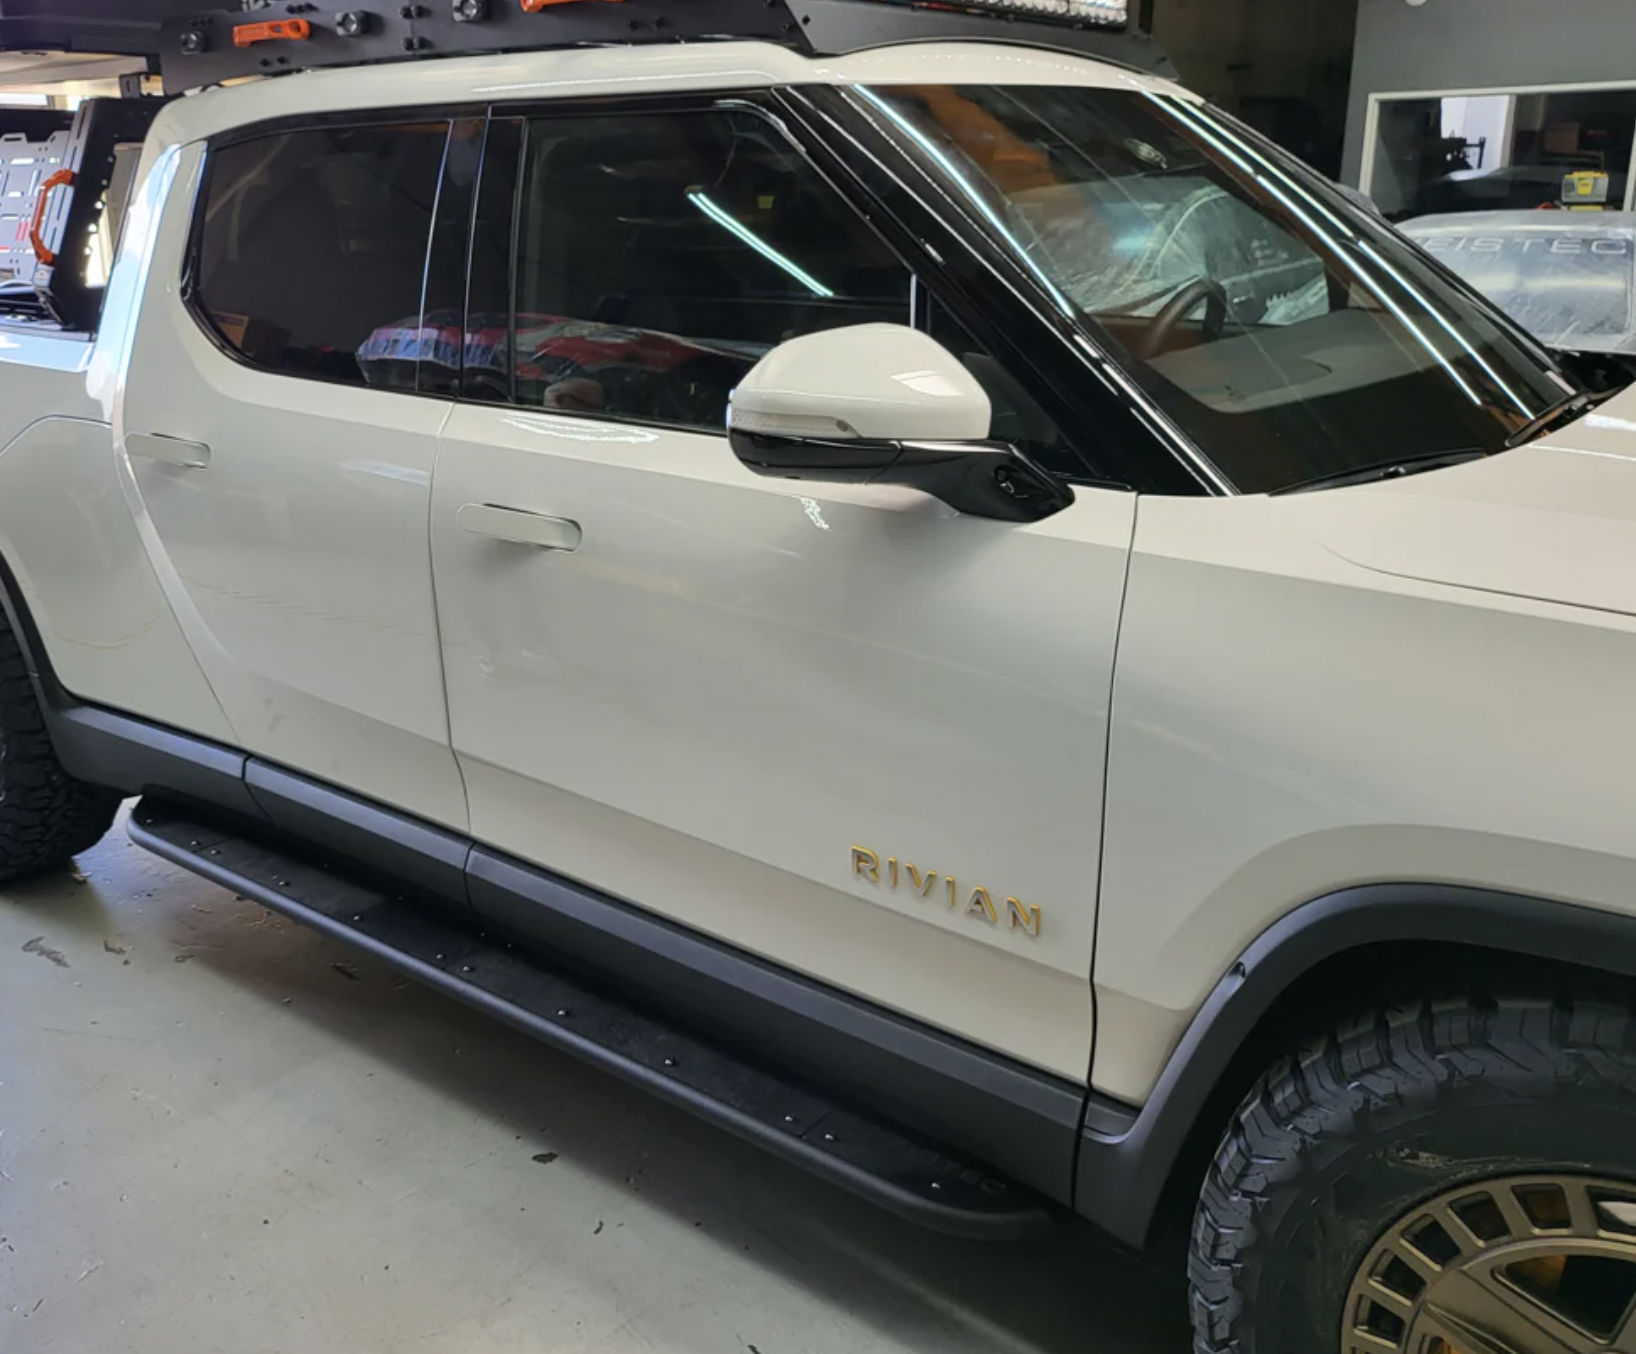 Rivian R1T R1S Overland RuffRax - Roof Rack & Bed Rack Screen Shot 2022-11-25 at 7.43.15 AM